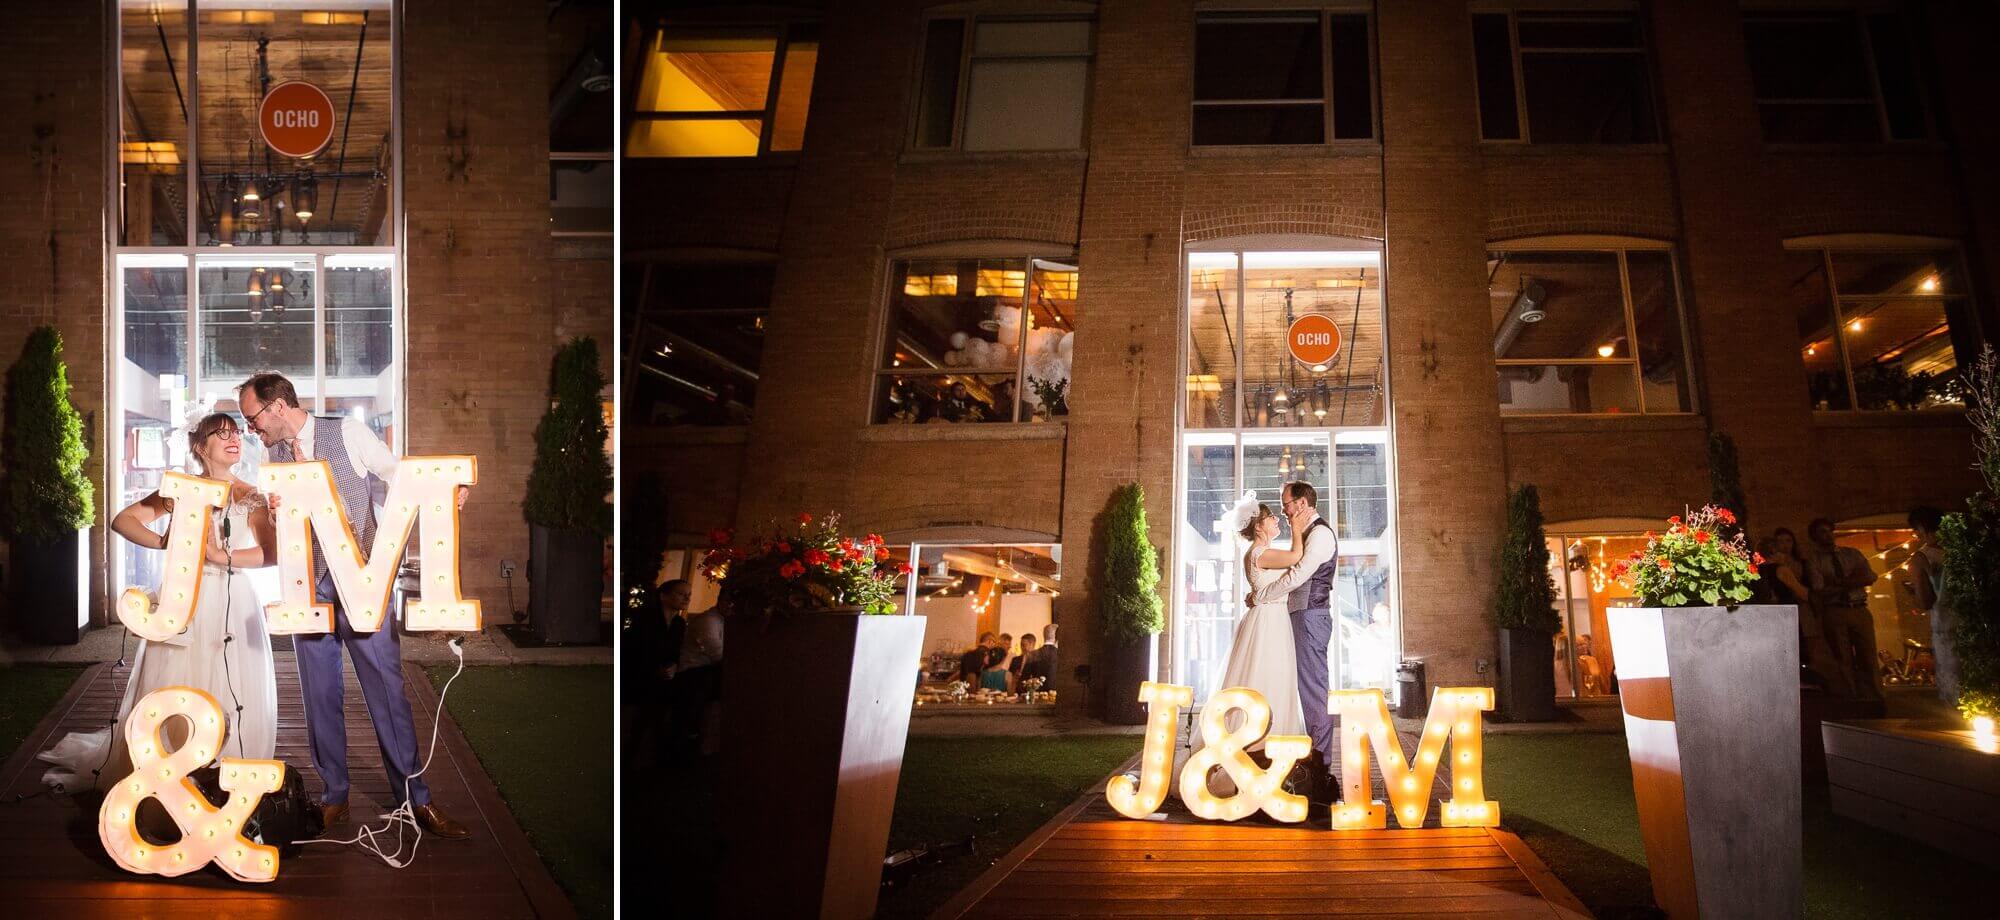 DIY initials of the bride and groom outside of their wedding reception at Hotel Ocho, Toronto